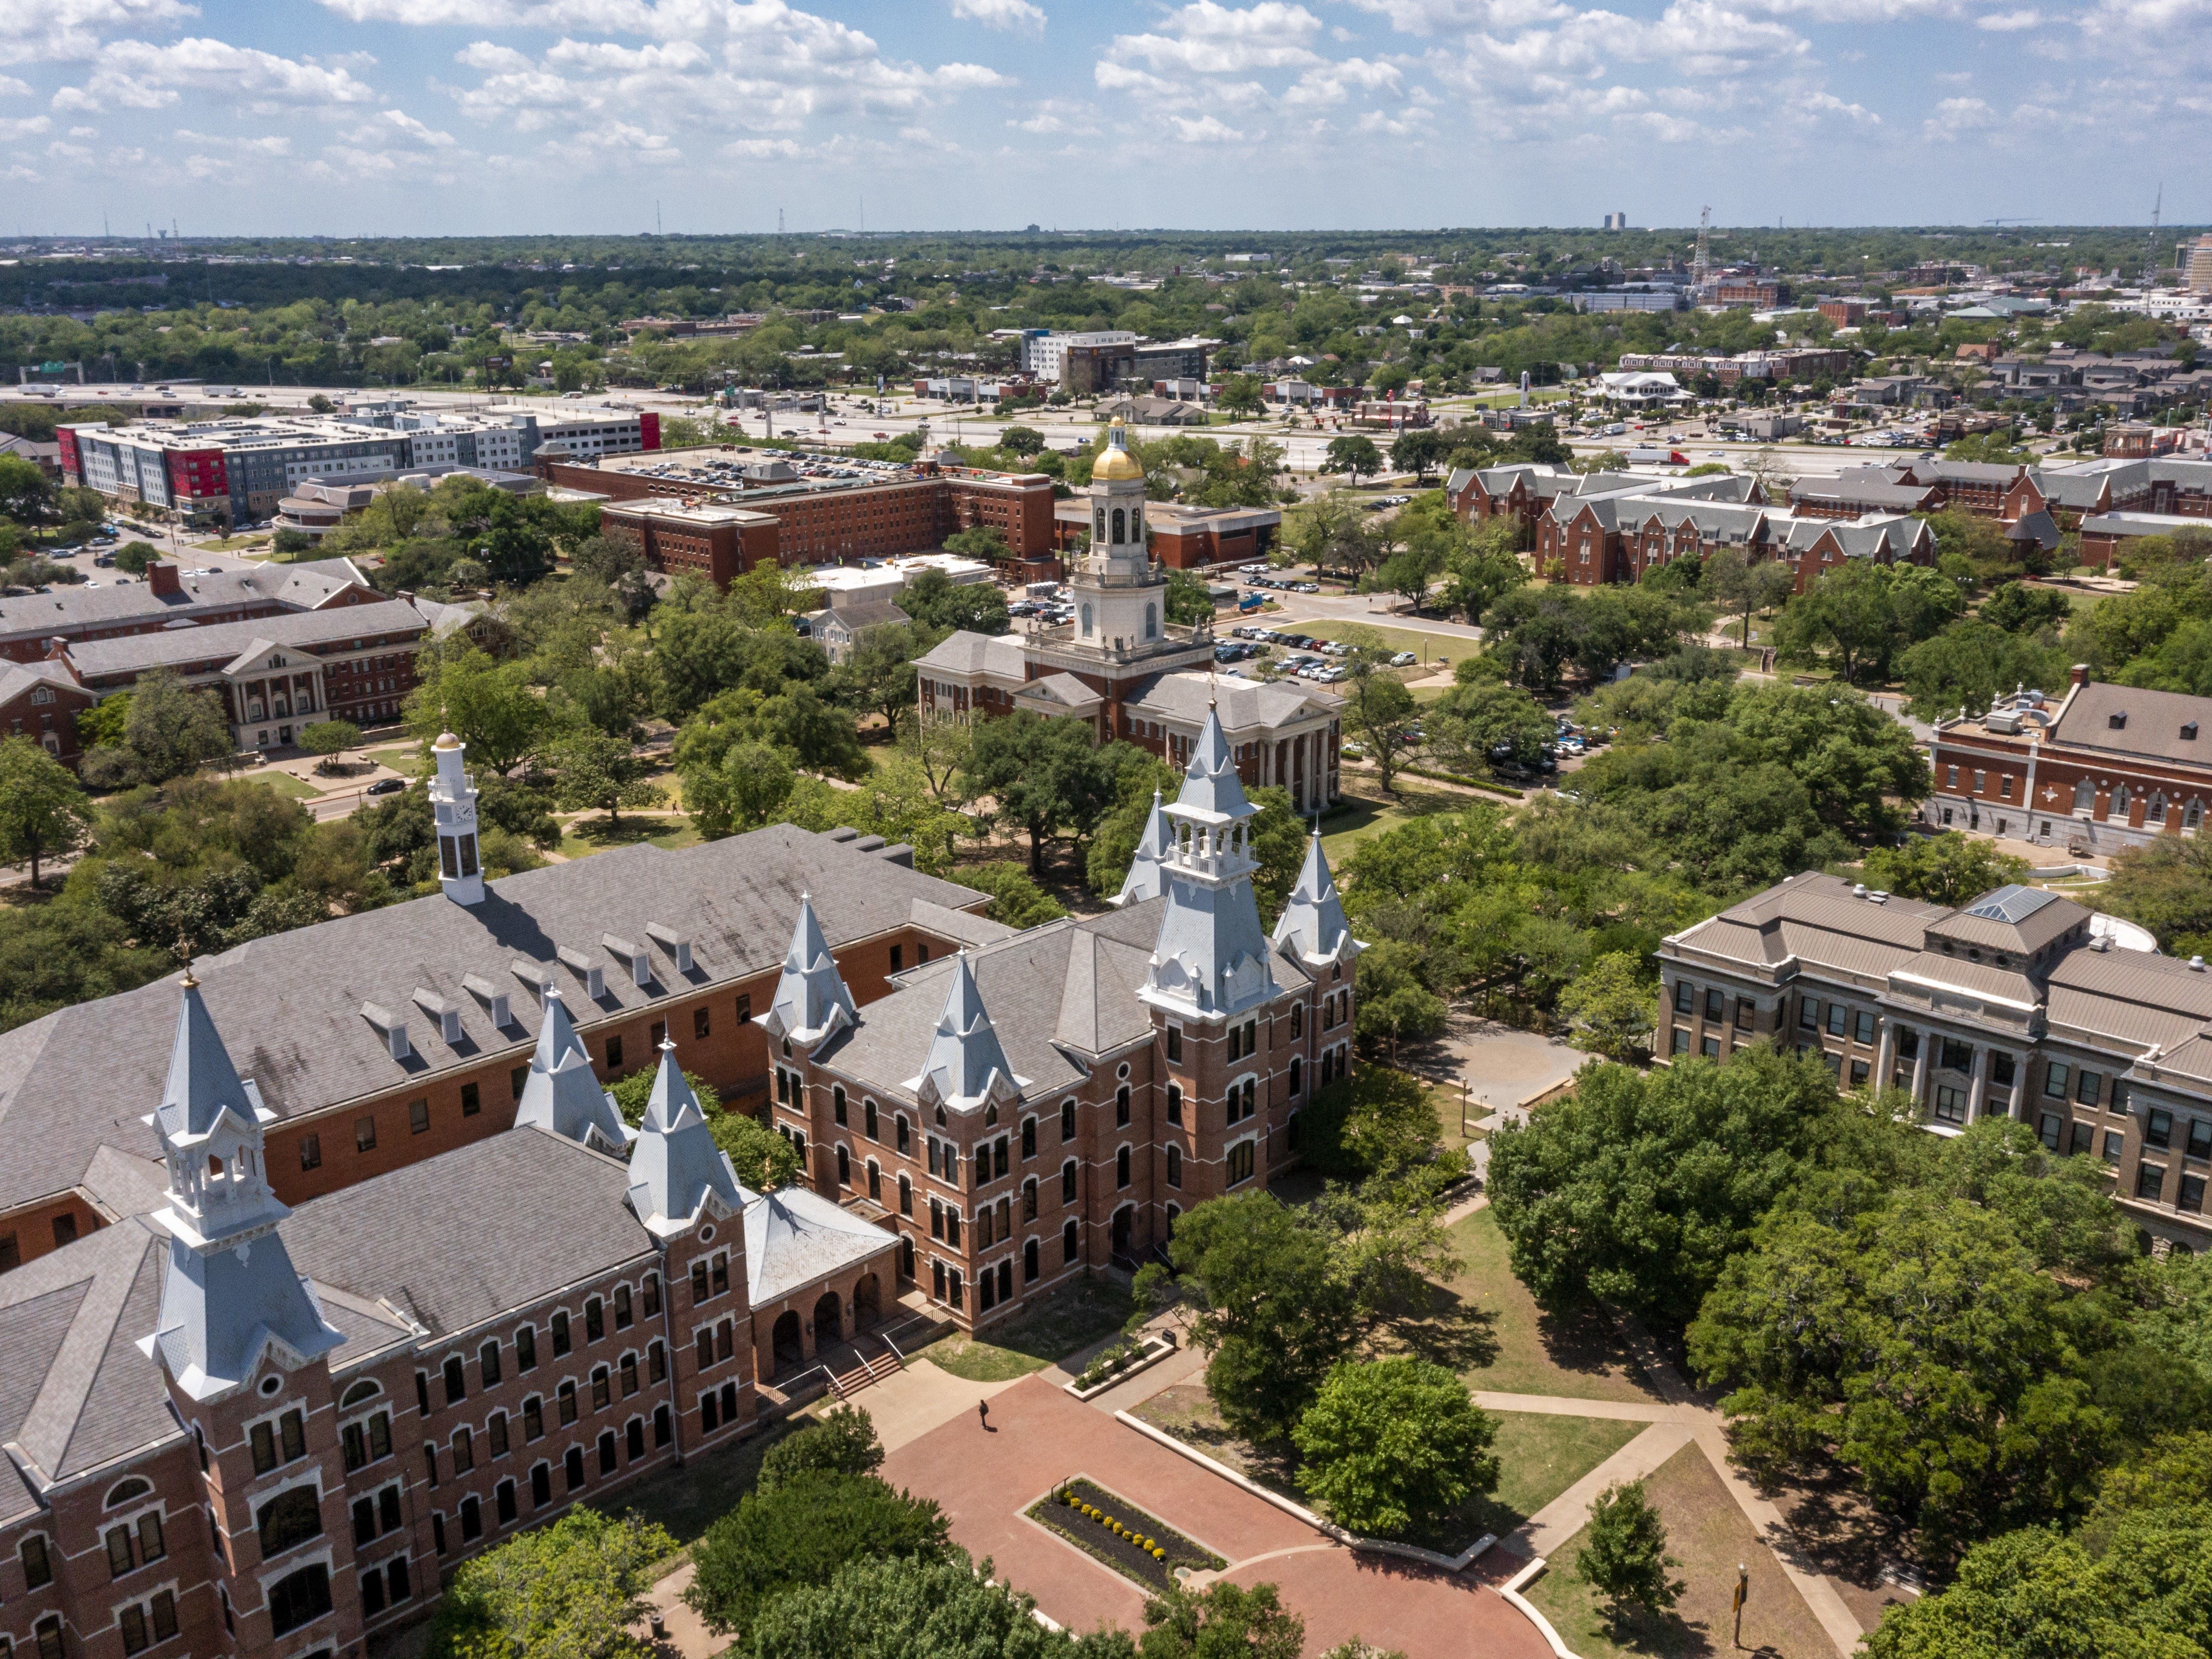 Flyover photo of the Baylor University campus